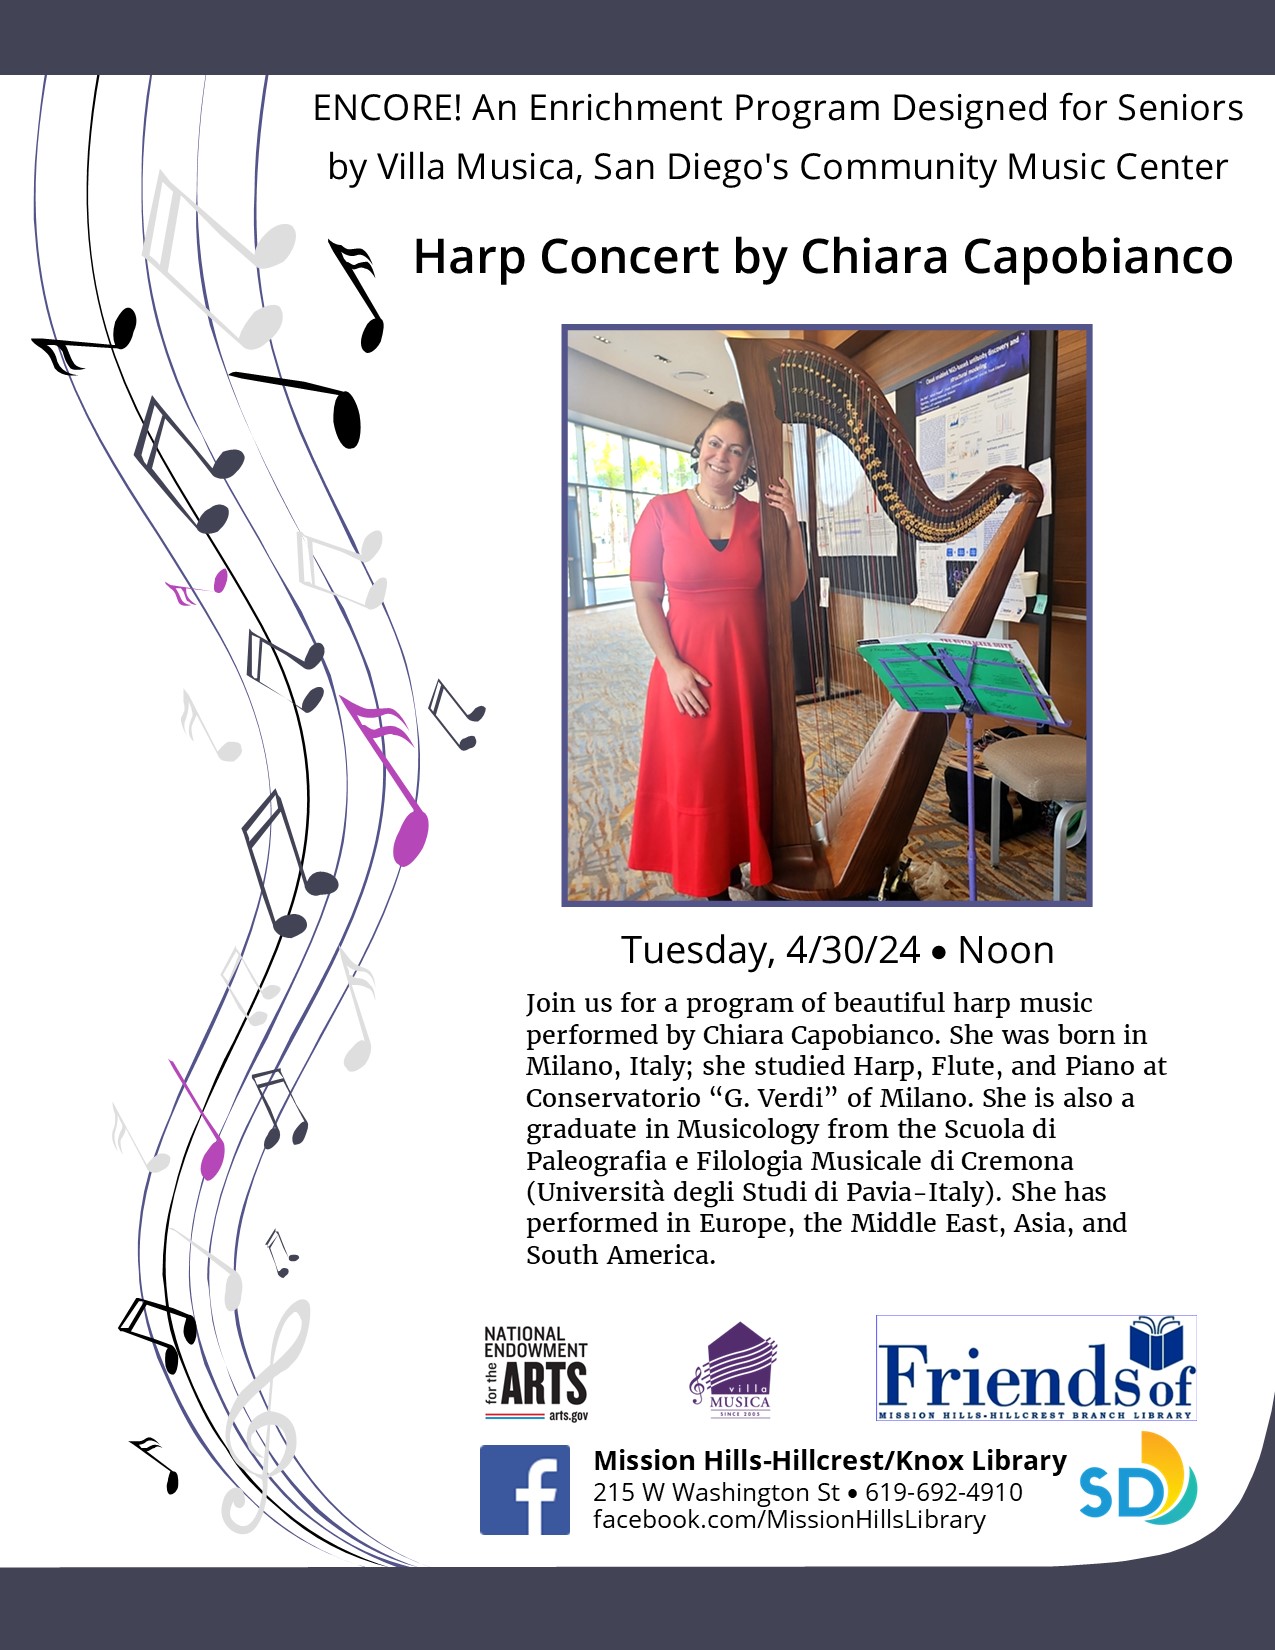 Flyer with event details and photo of Chiara with harp